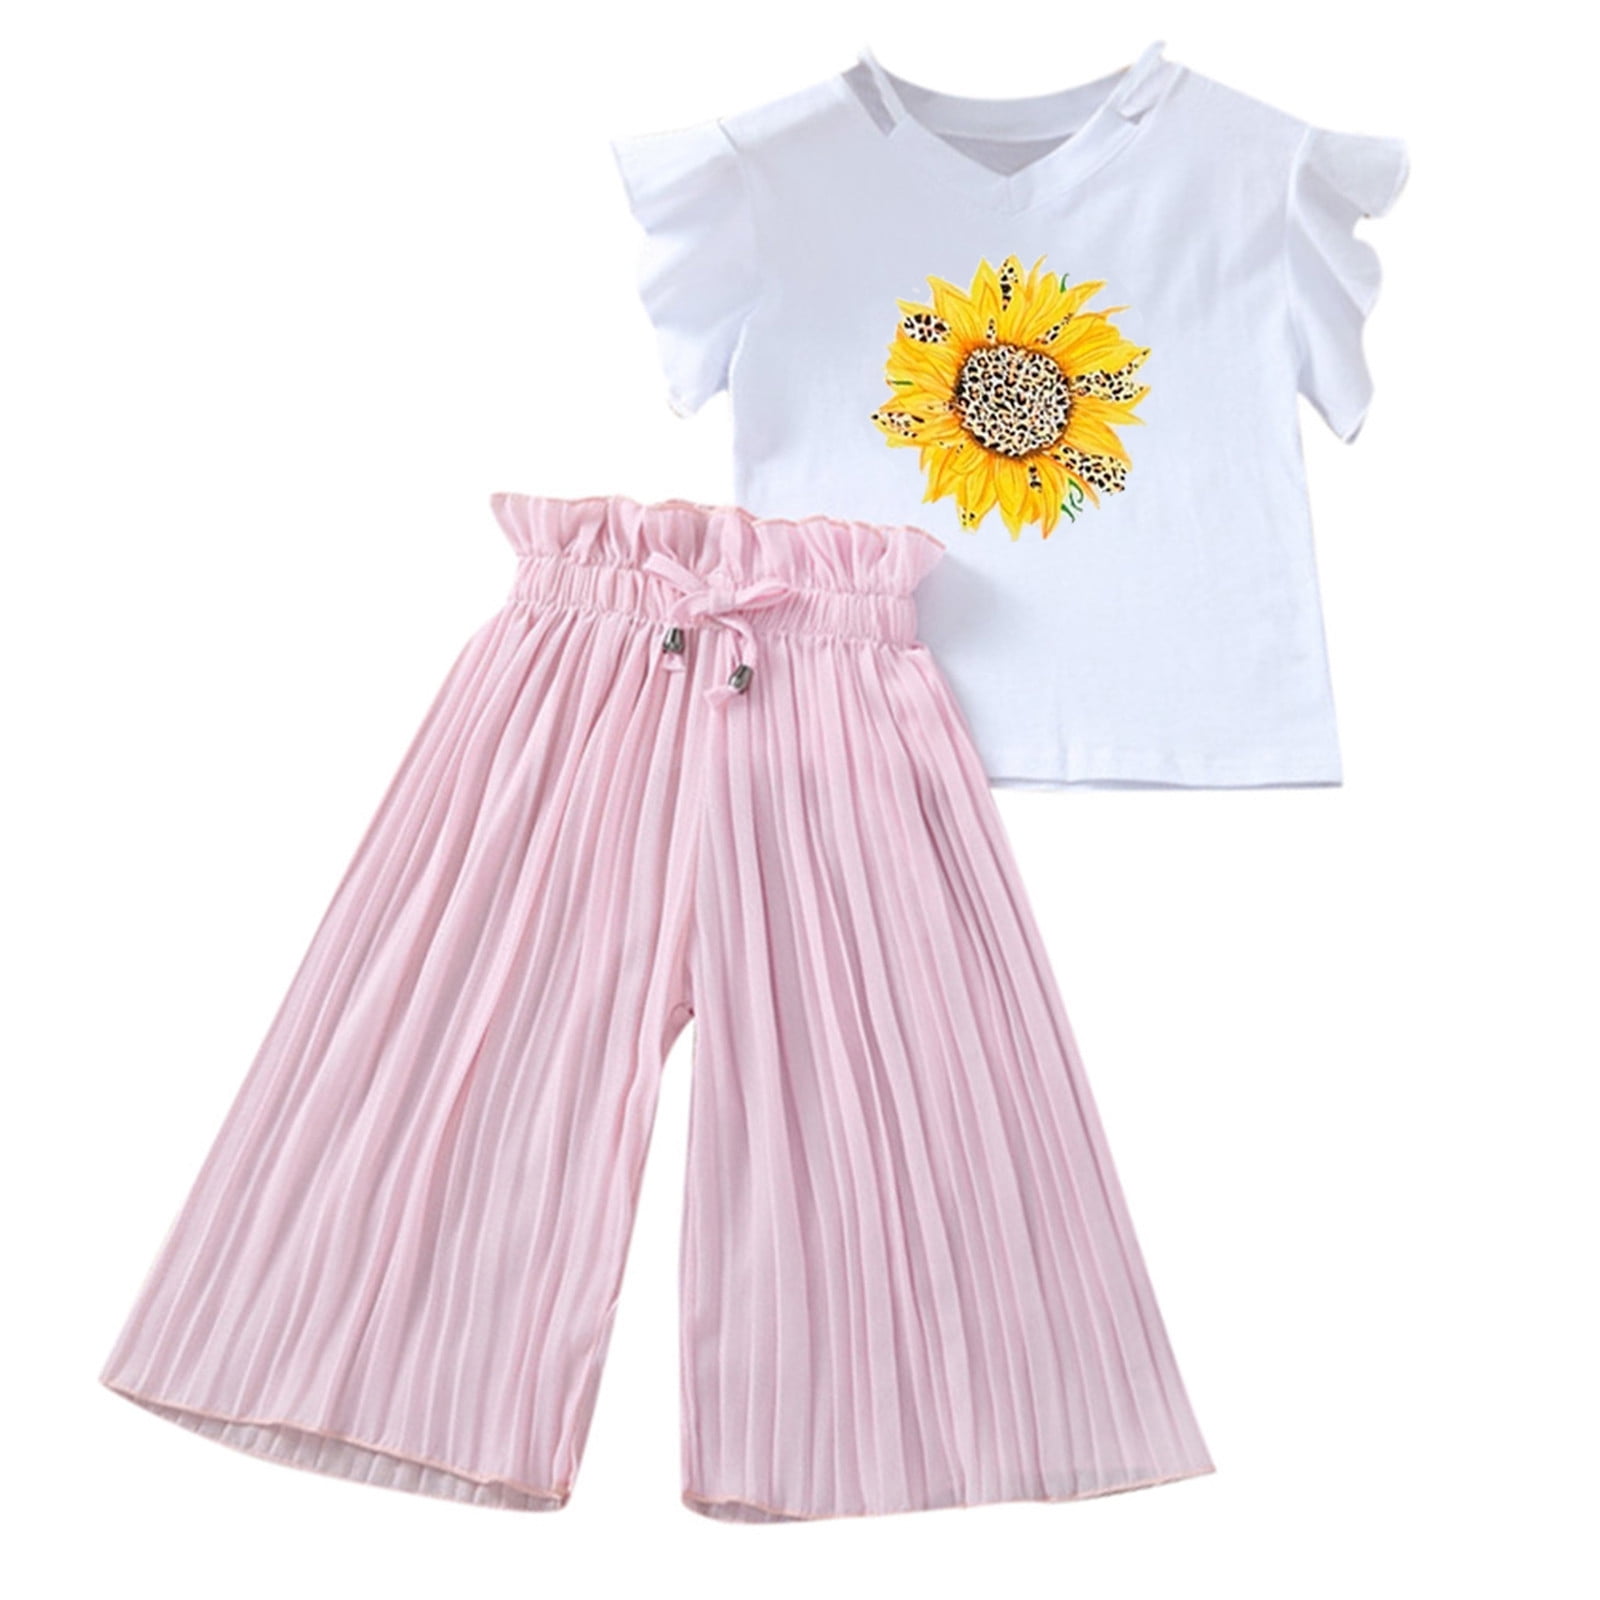 TAIAOJING Toddler Baby Girl Clothes Set Kids Clothing Summer Sunflower ...